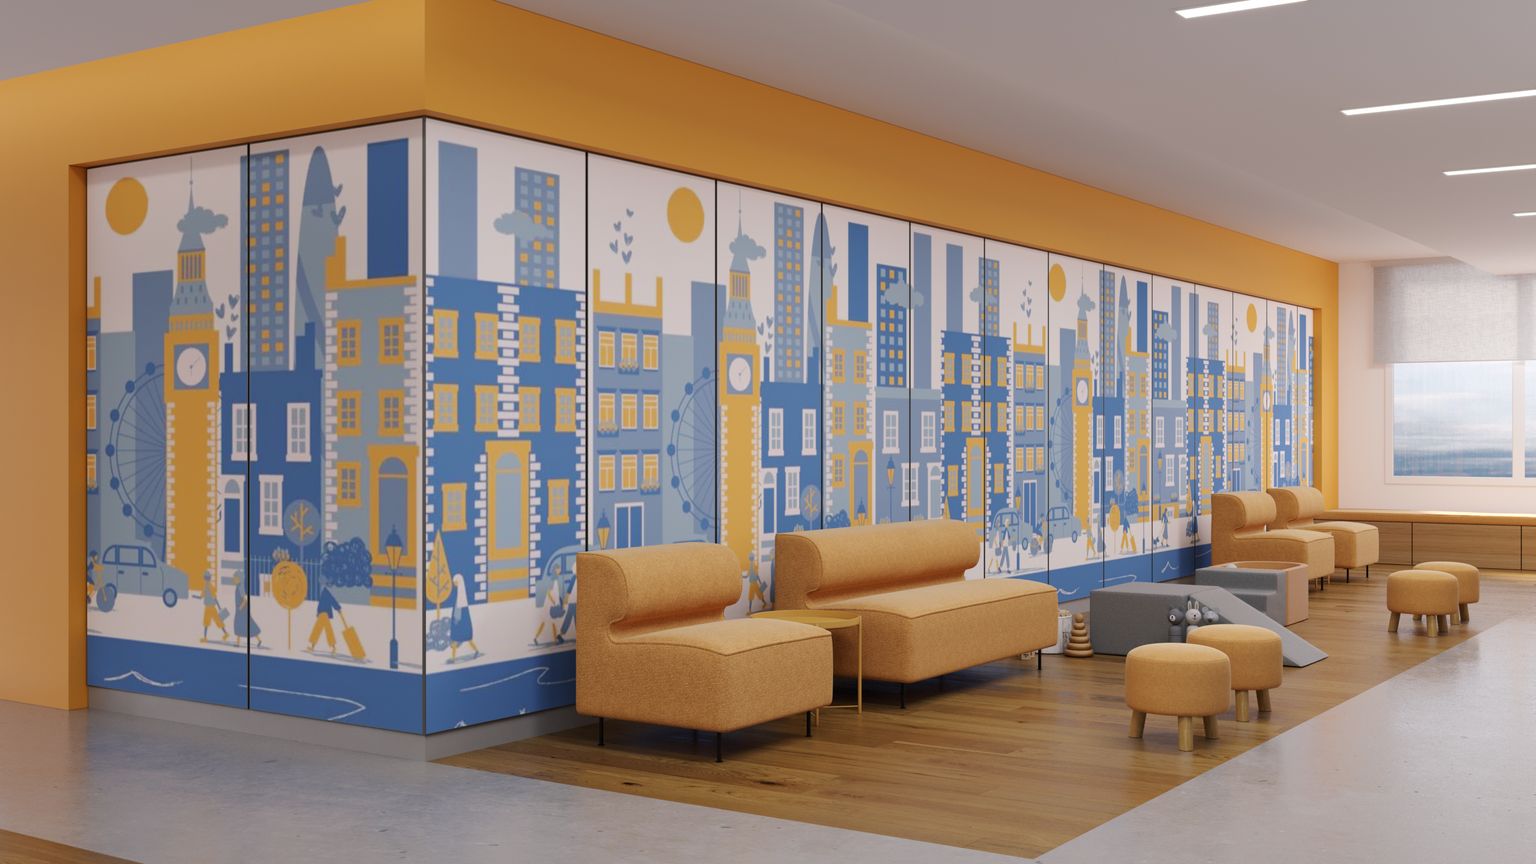 An immersive art installation of a playful cityscape on graphic panels in a pediatric hospital seating area.